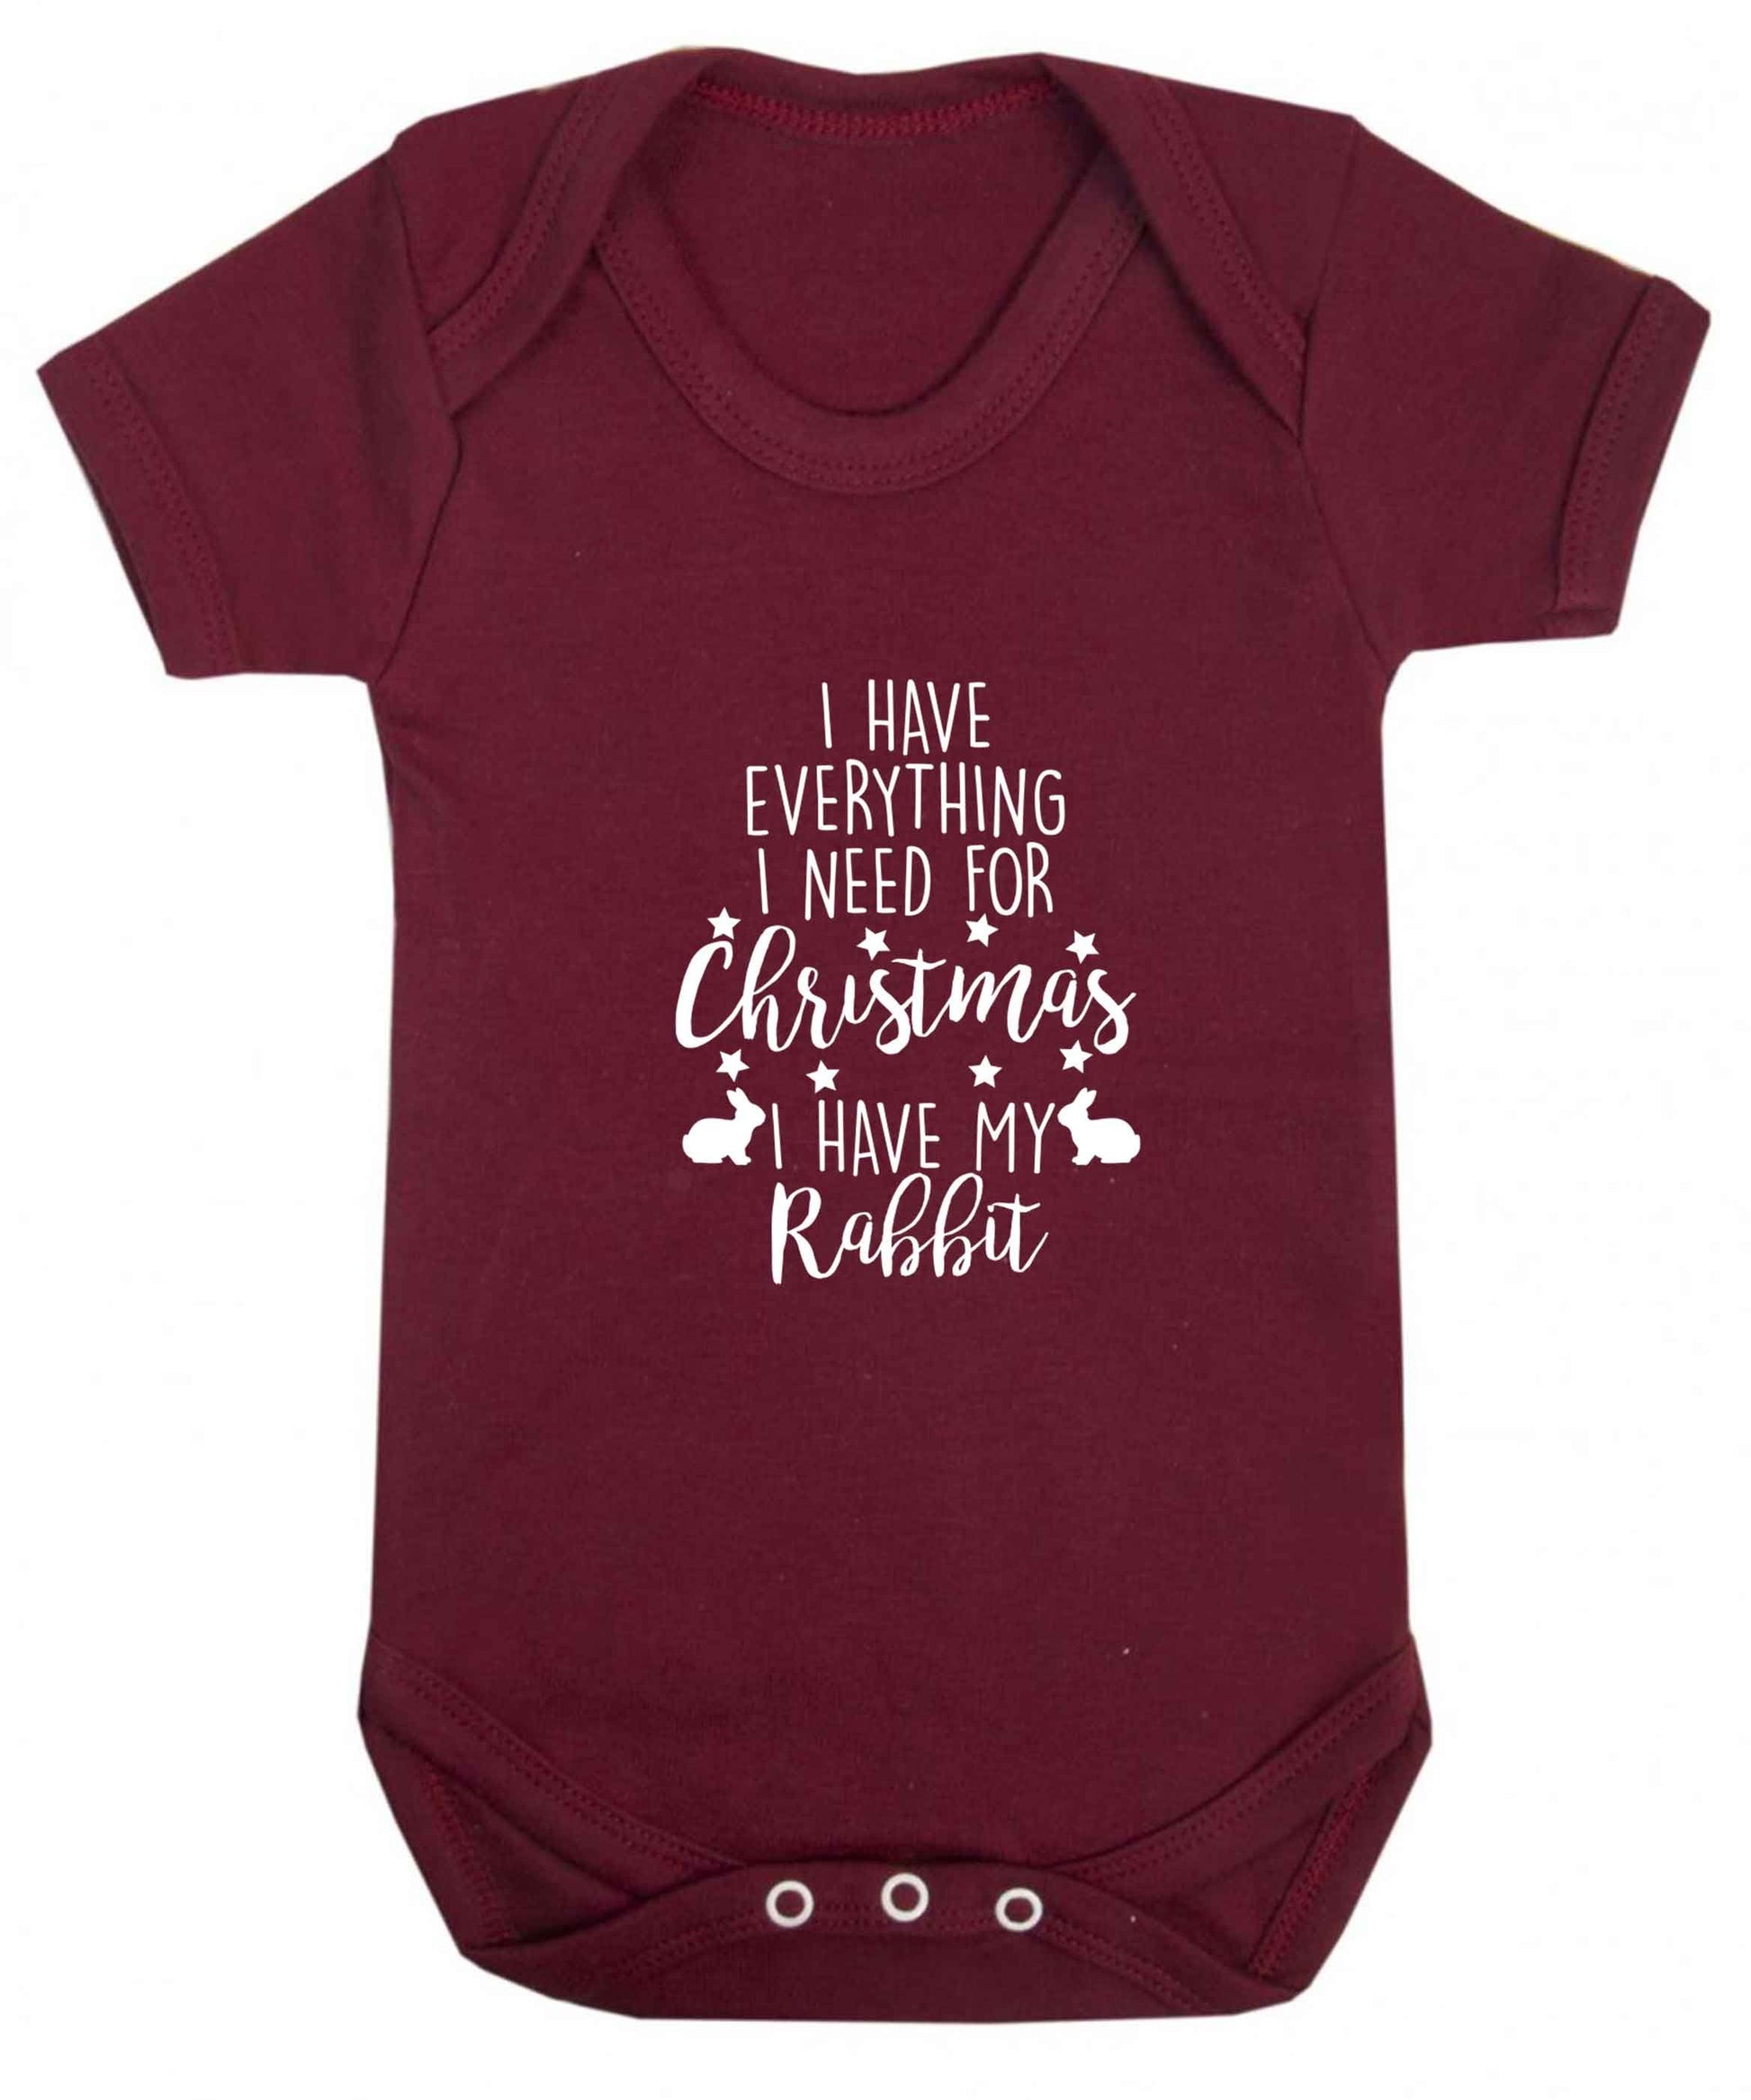 I have everything I need for Christmas I have my rabbit baby vest maroon 18-24 months